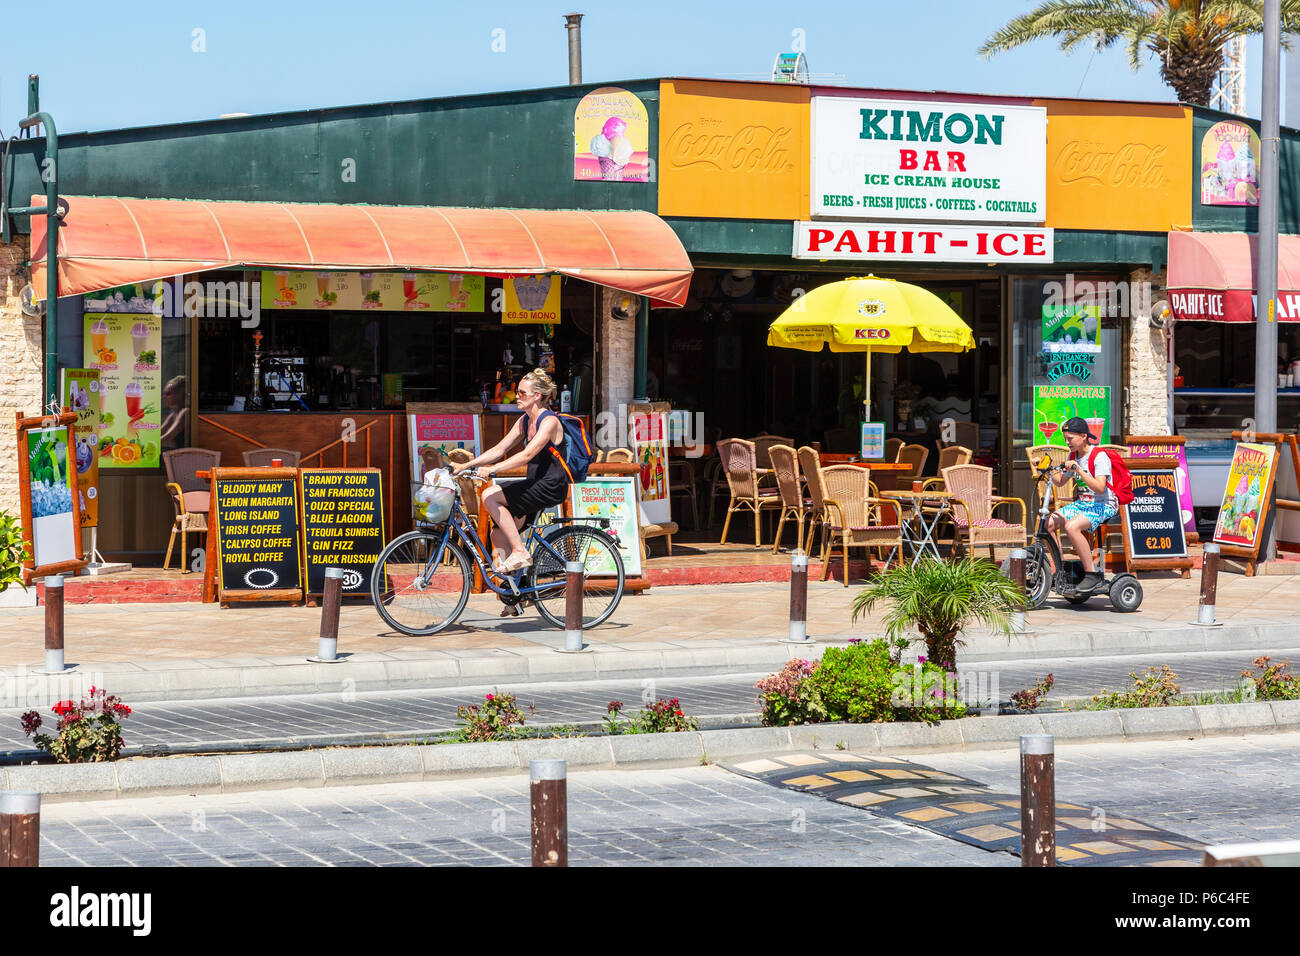 Woman on a bicycle followed by her son on an electric trike, cycling on a cycle track in front of a public bar, Ayia Napa, Cyprus Stock Photo